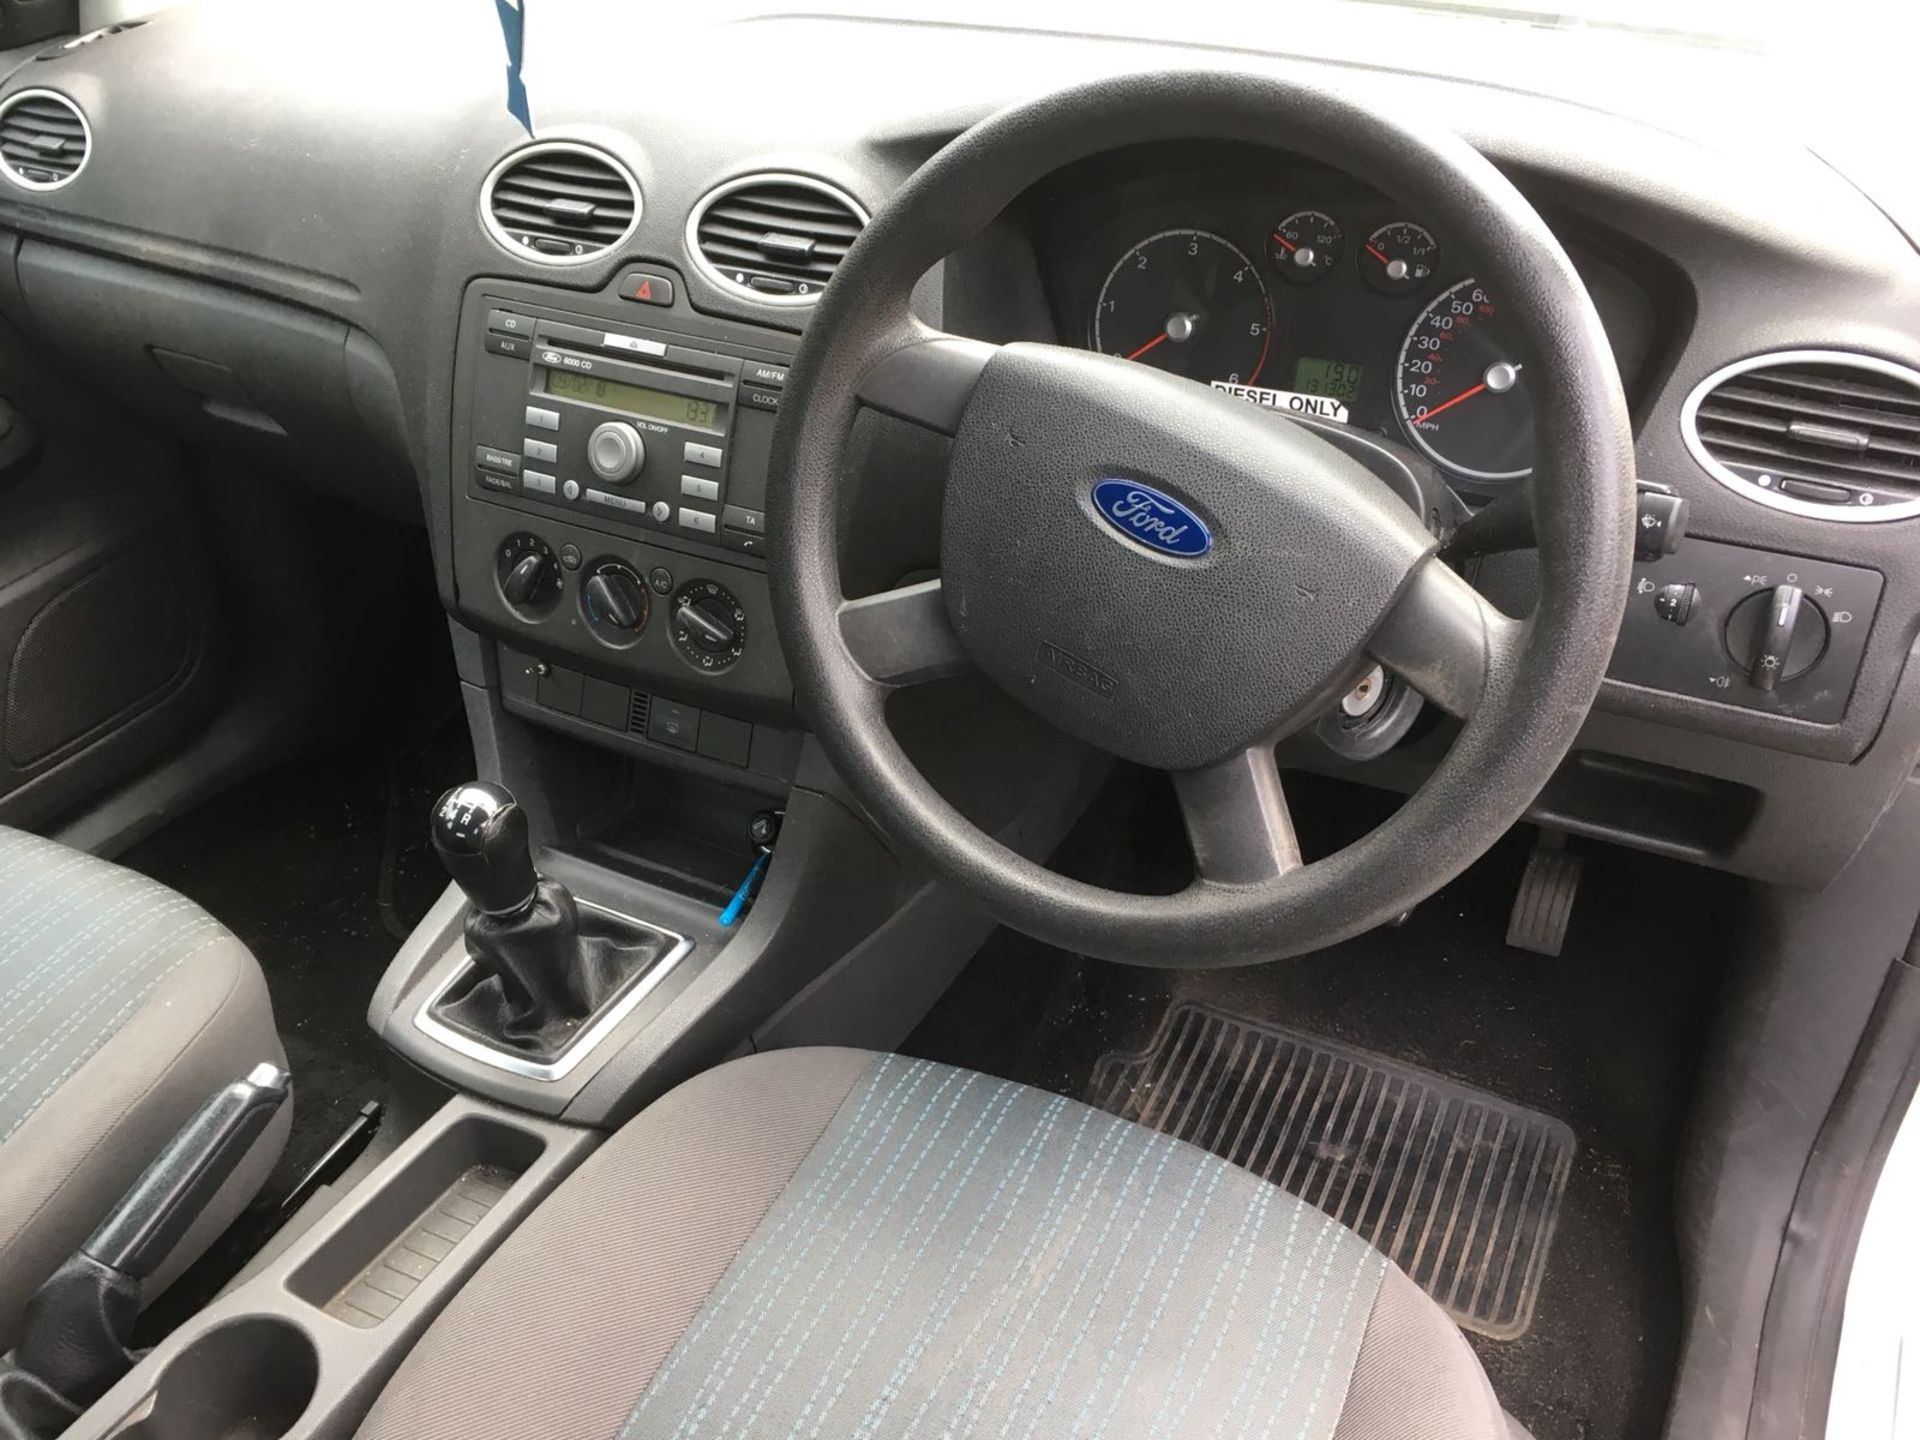 Ford Focus 1.6 TDCI - Image 9 of 11